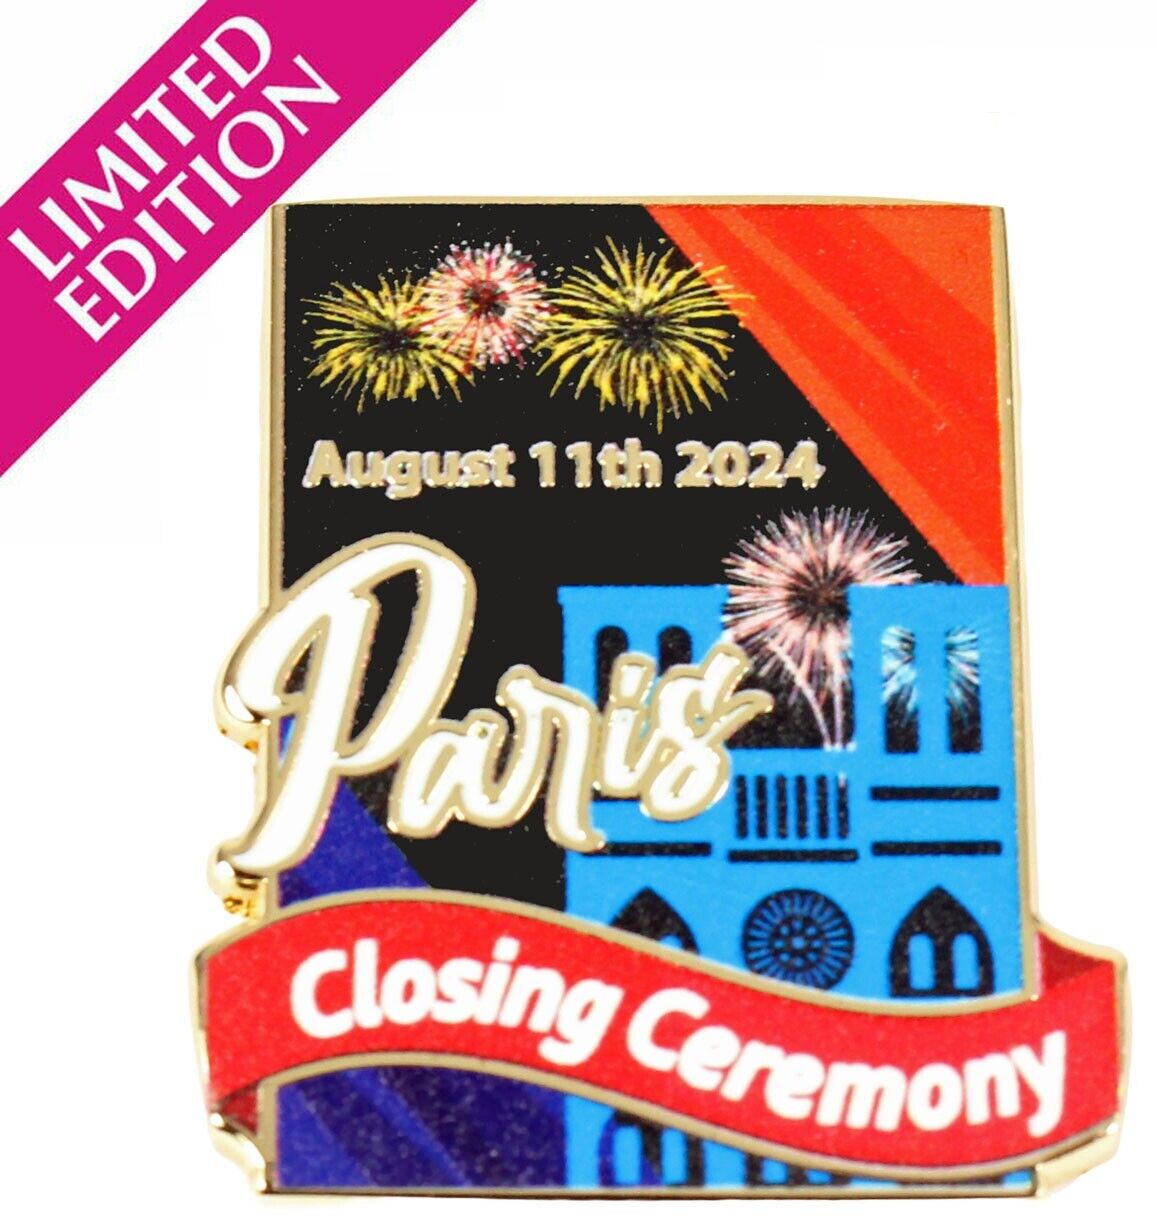 Paris 2024 Olympics Closing Ceremony Pin - Limited Editions 1,000